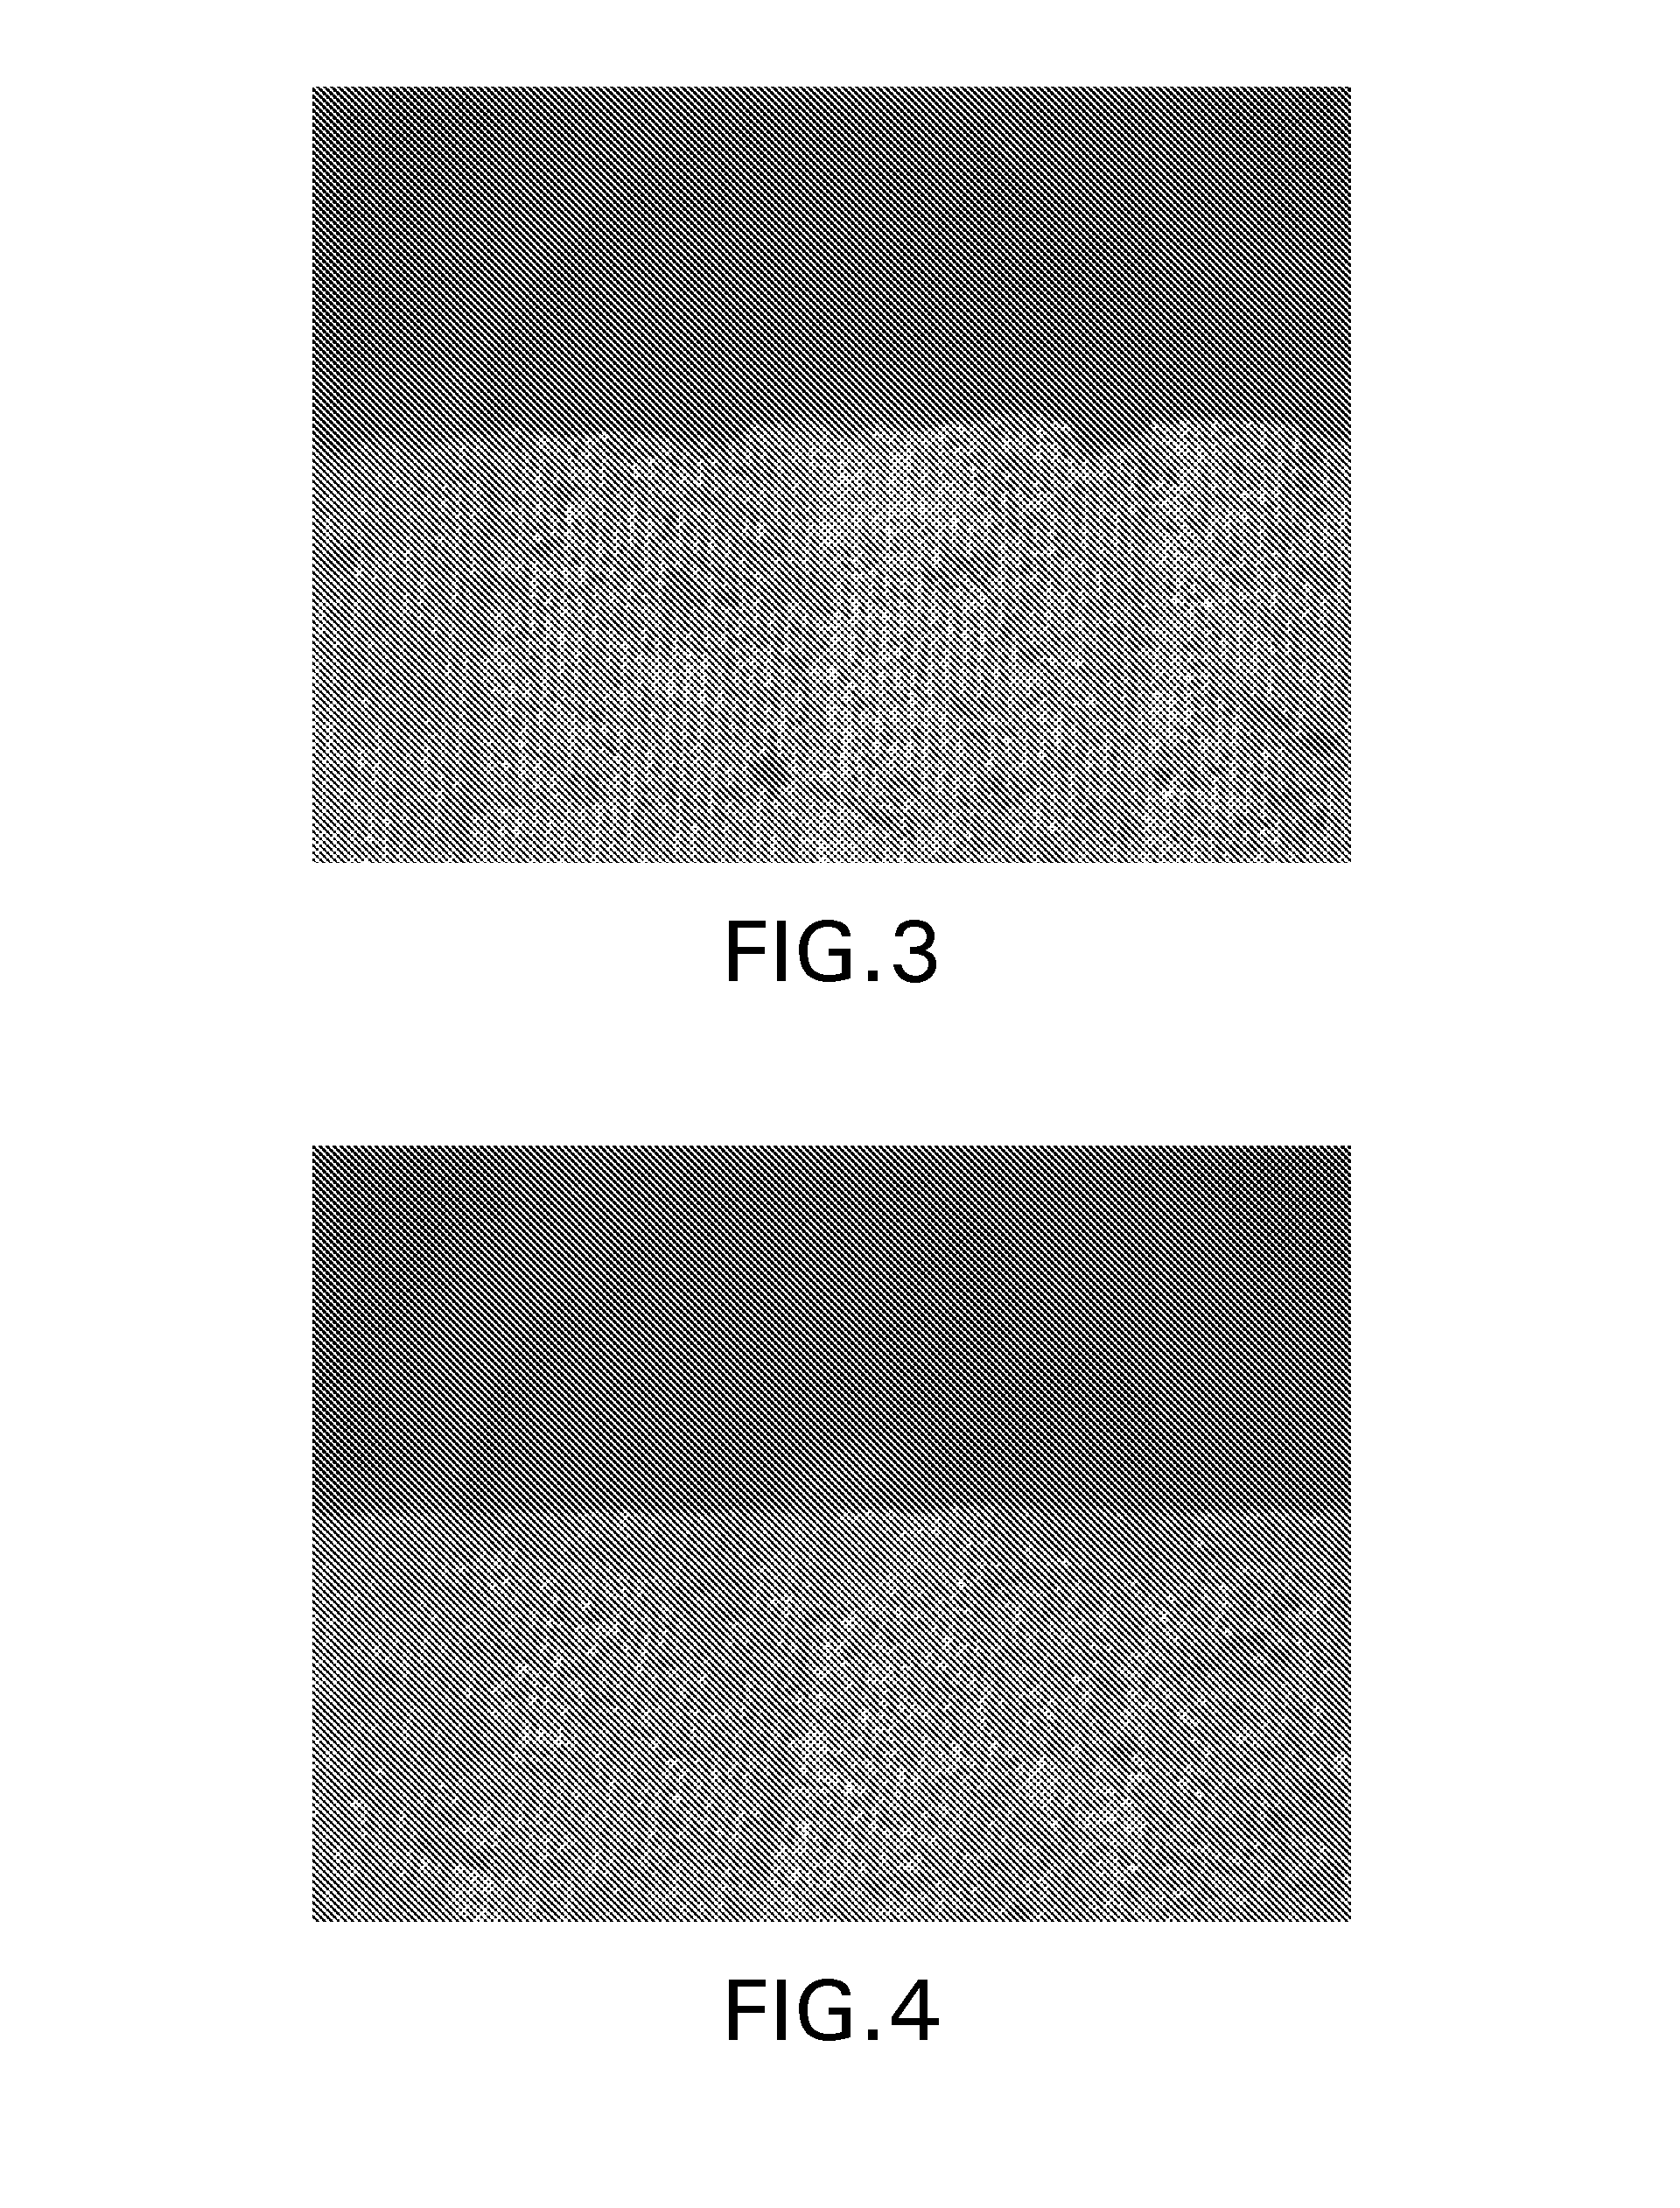 Abuse resistant melt extruded formulation having reduced alcohol interaction